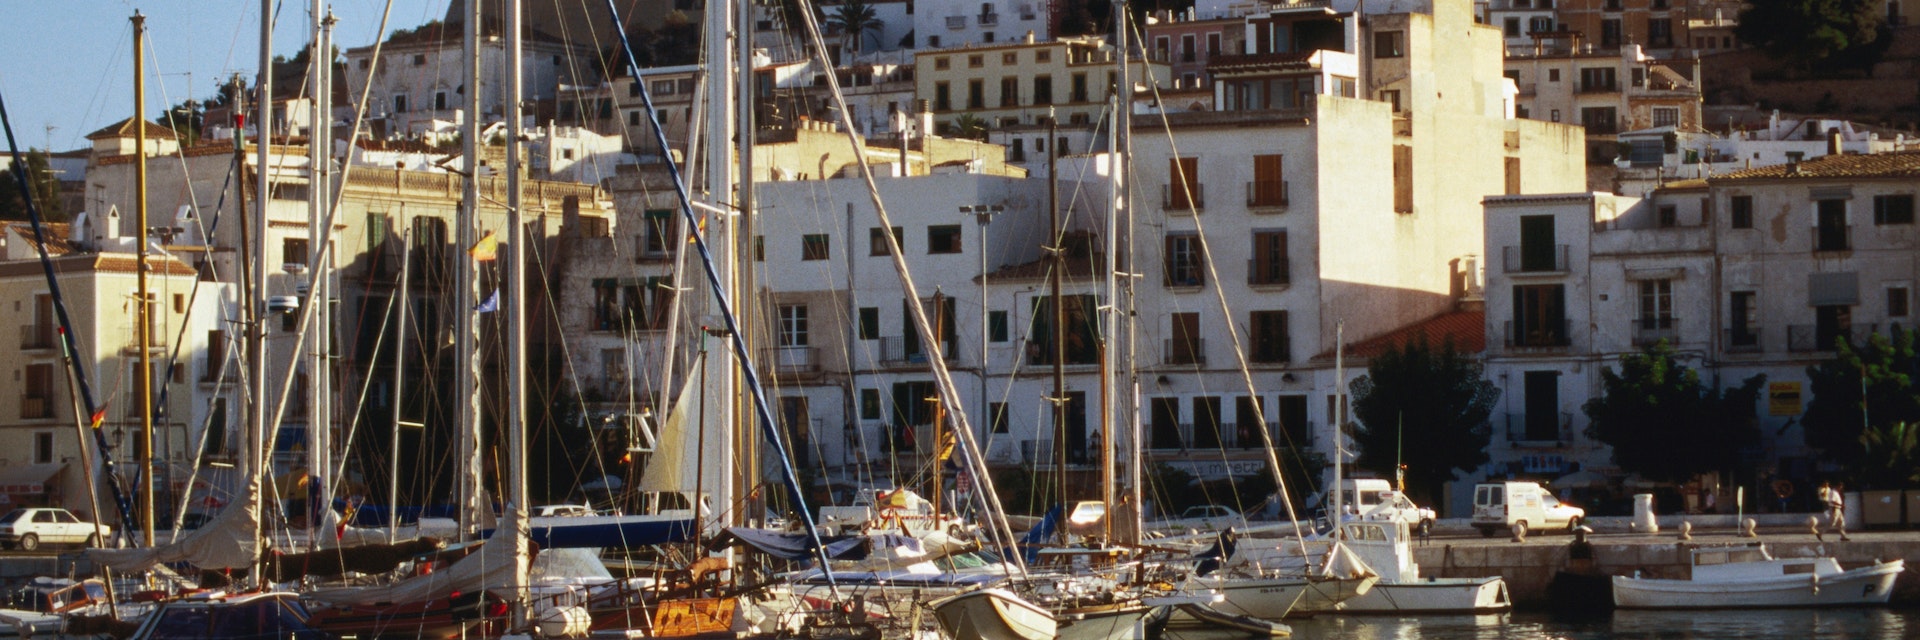 The harbour in Ibiza with D'Alt Vila, the fortress and walled town on the top of the hill.